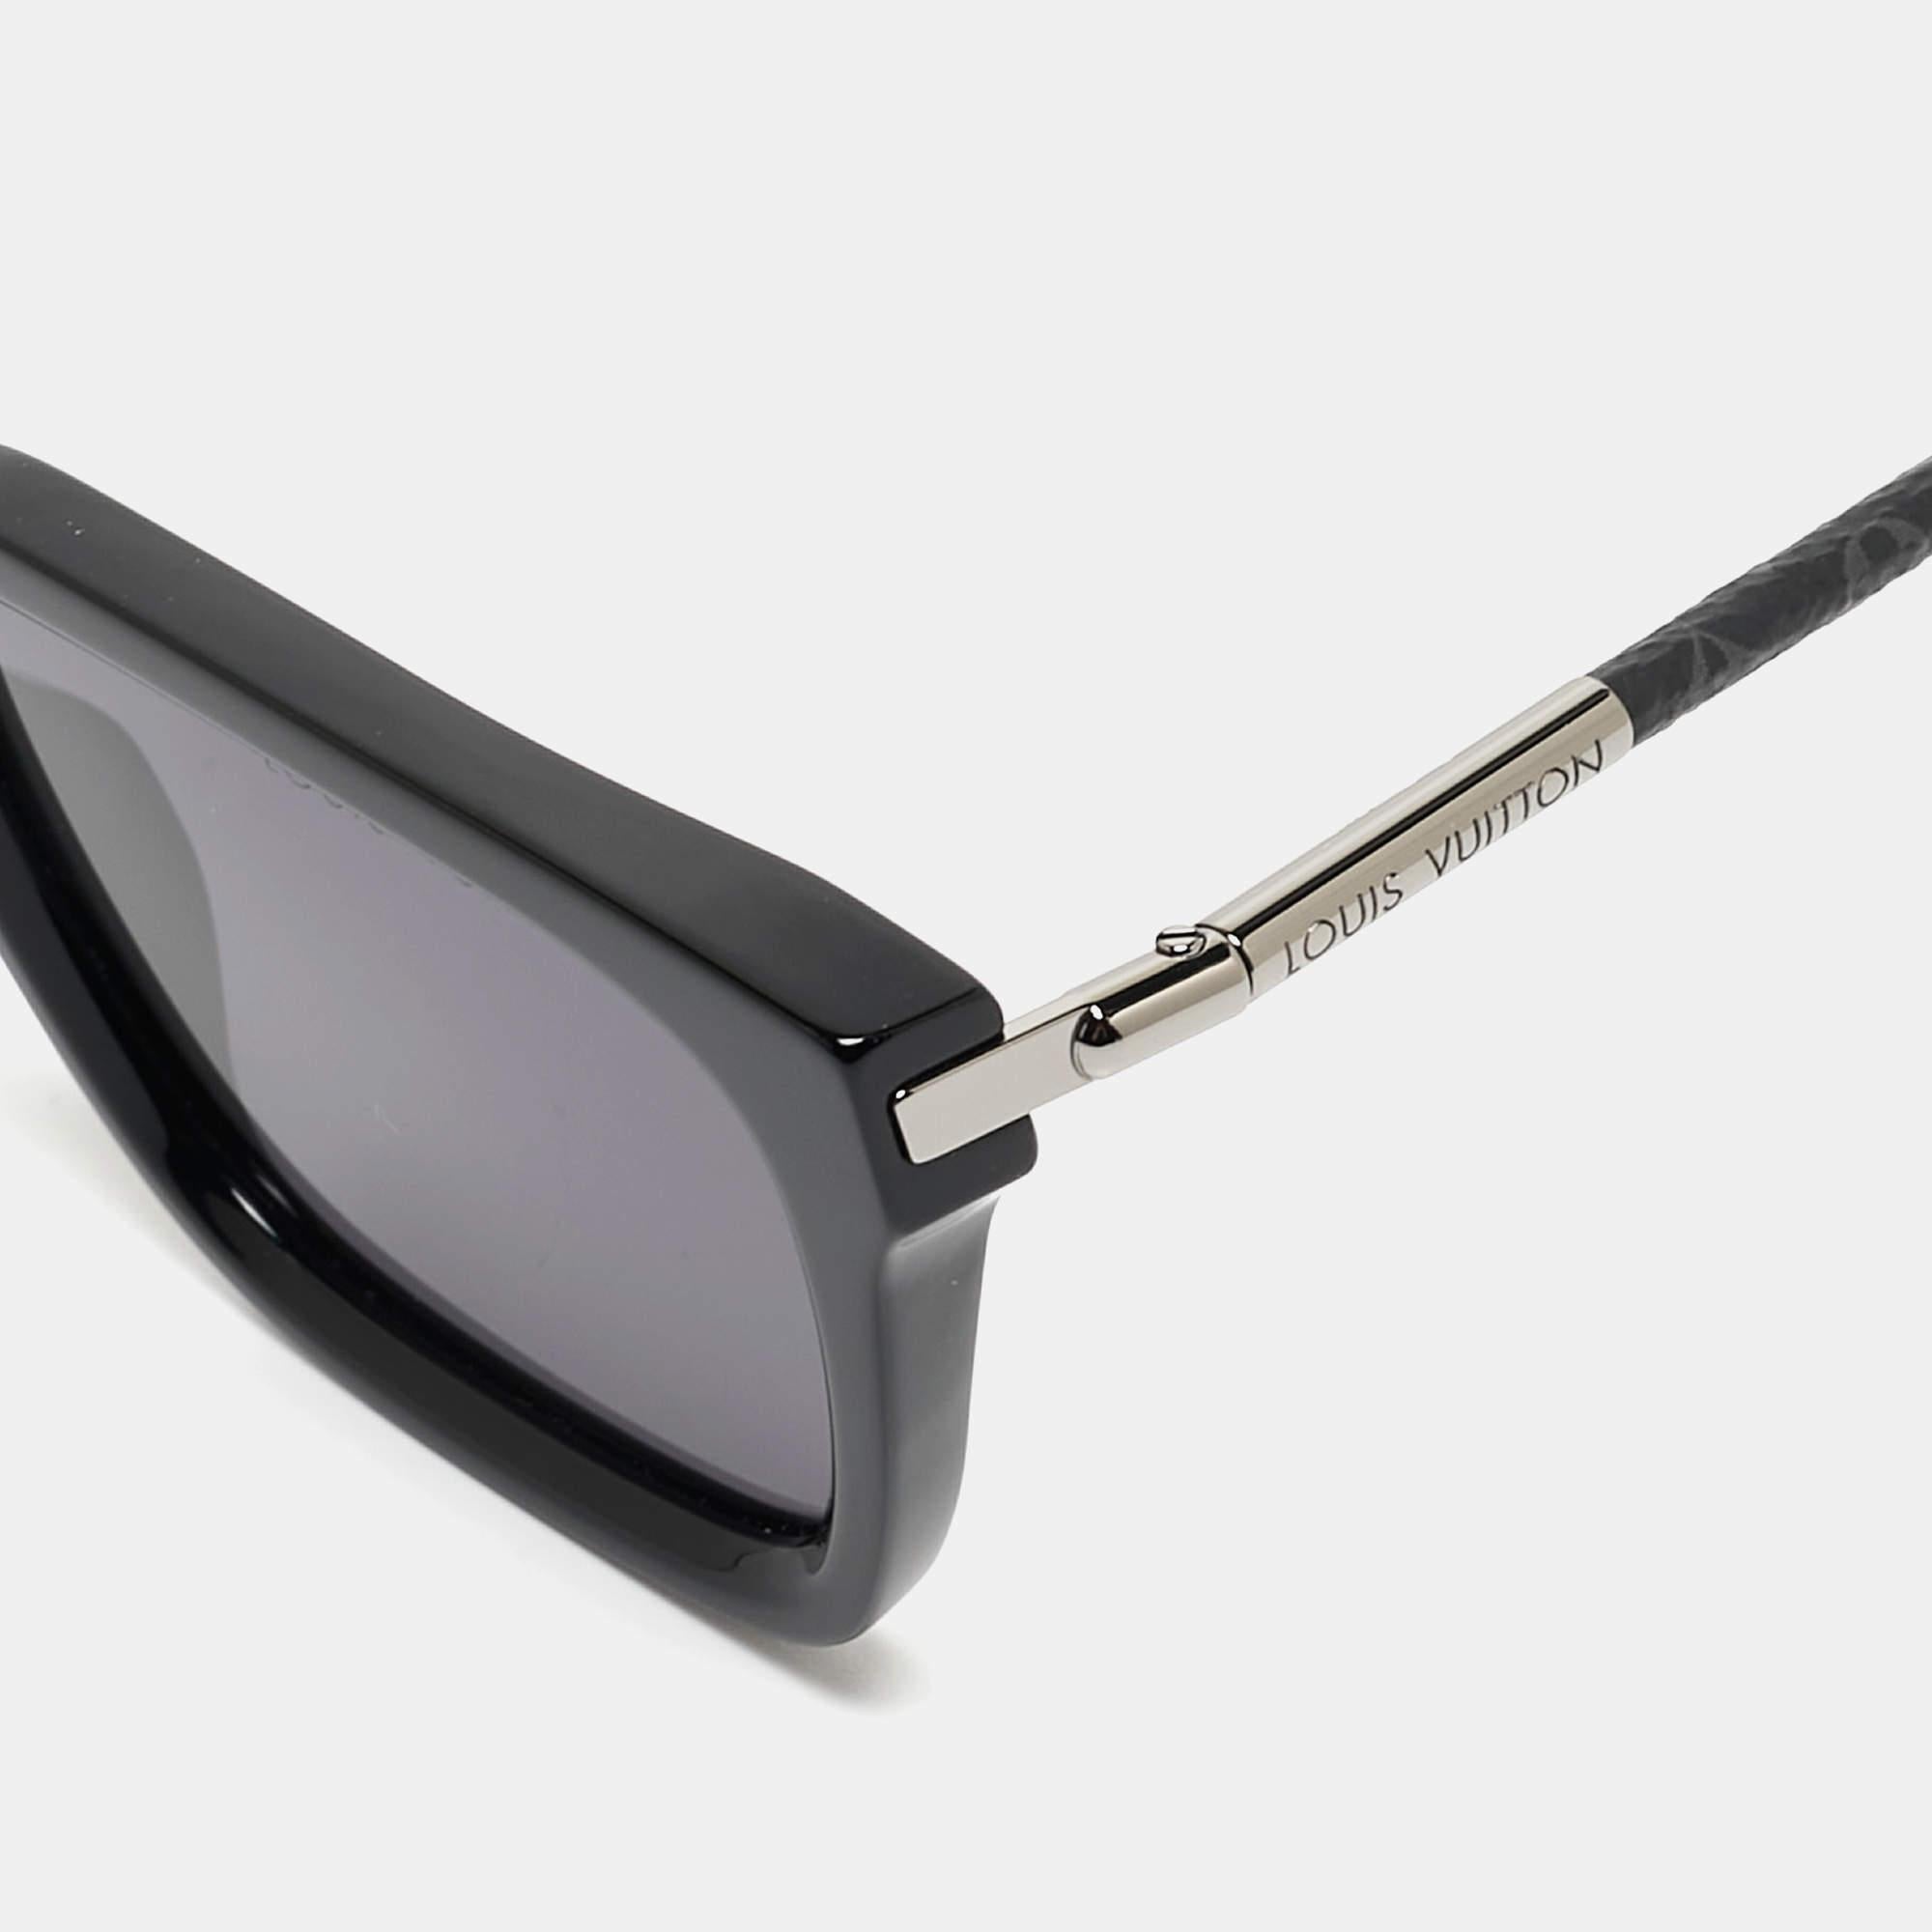 The stylish frame and good-quality lenses make these sunglasses a high-fashion accessory that you must own. Designed by Louis Vuitton, the pair will look best with your statement outfits.

